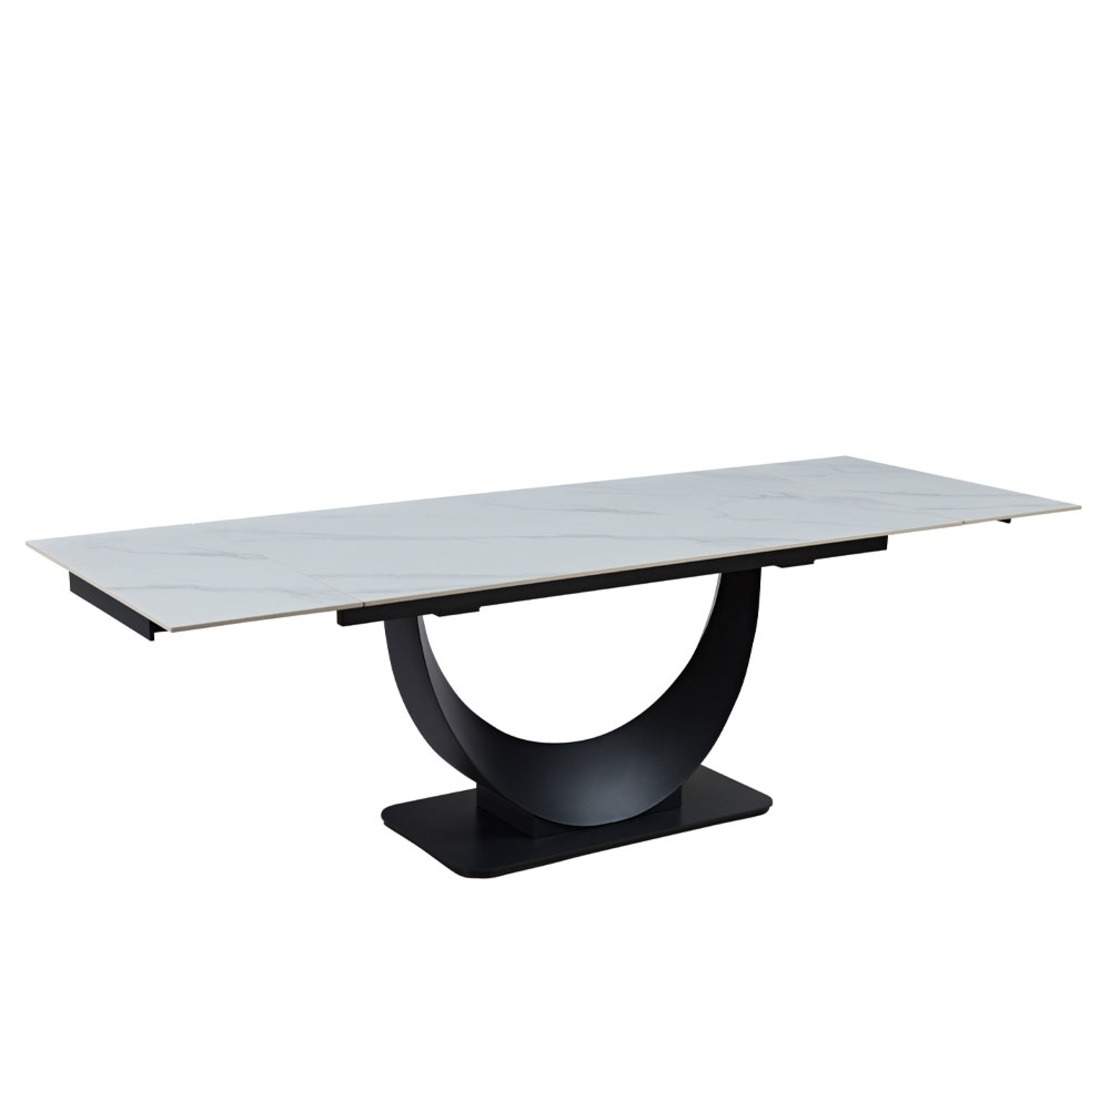 MEZZA LUNA TABLE EXTENDABLE SINTERED STONE WHITE WITH MARBLE PATTERN METAL ANTHRACITE PRC